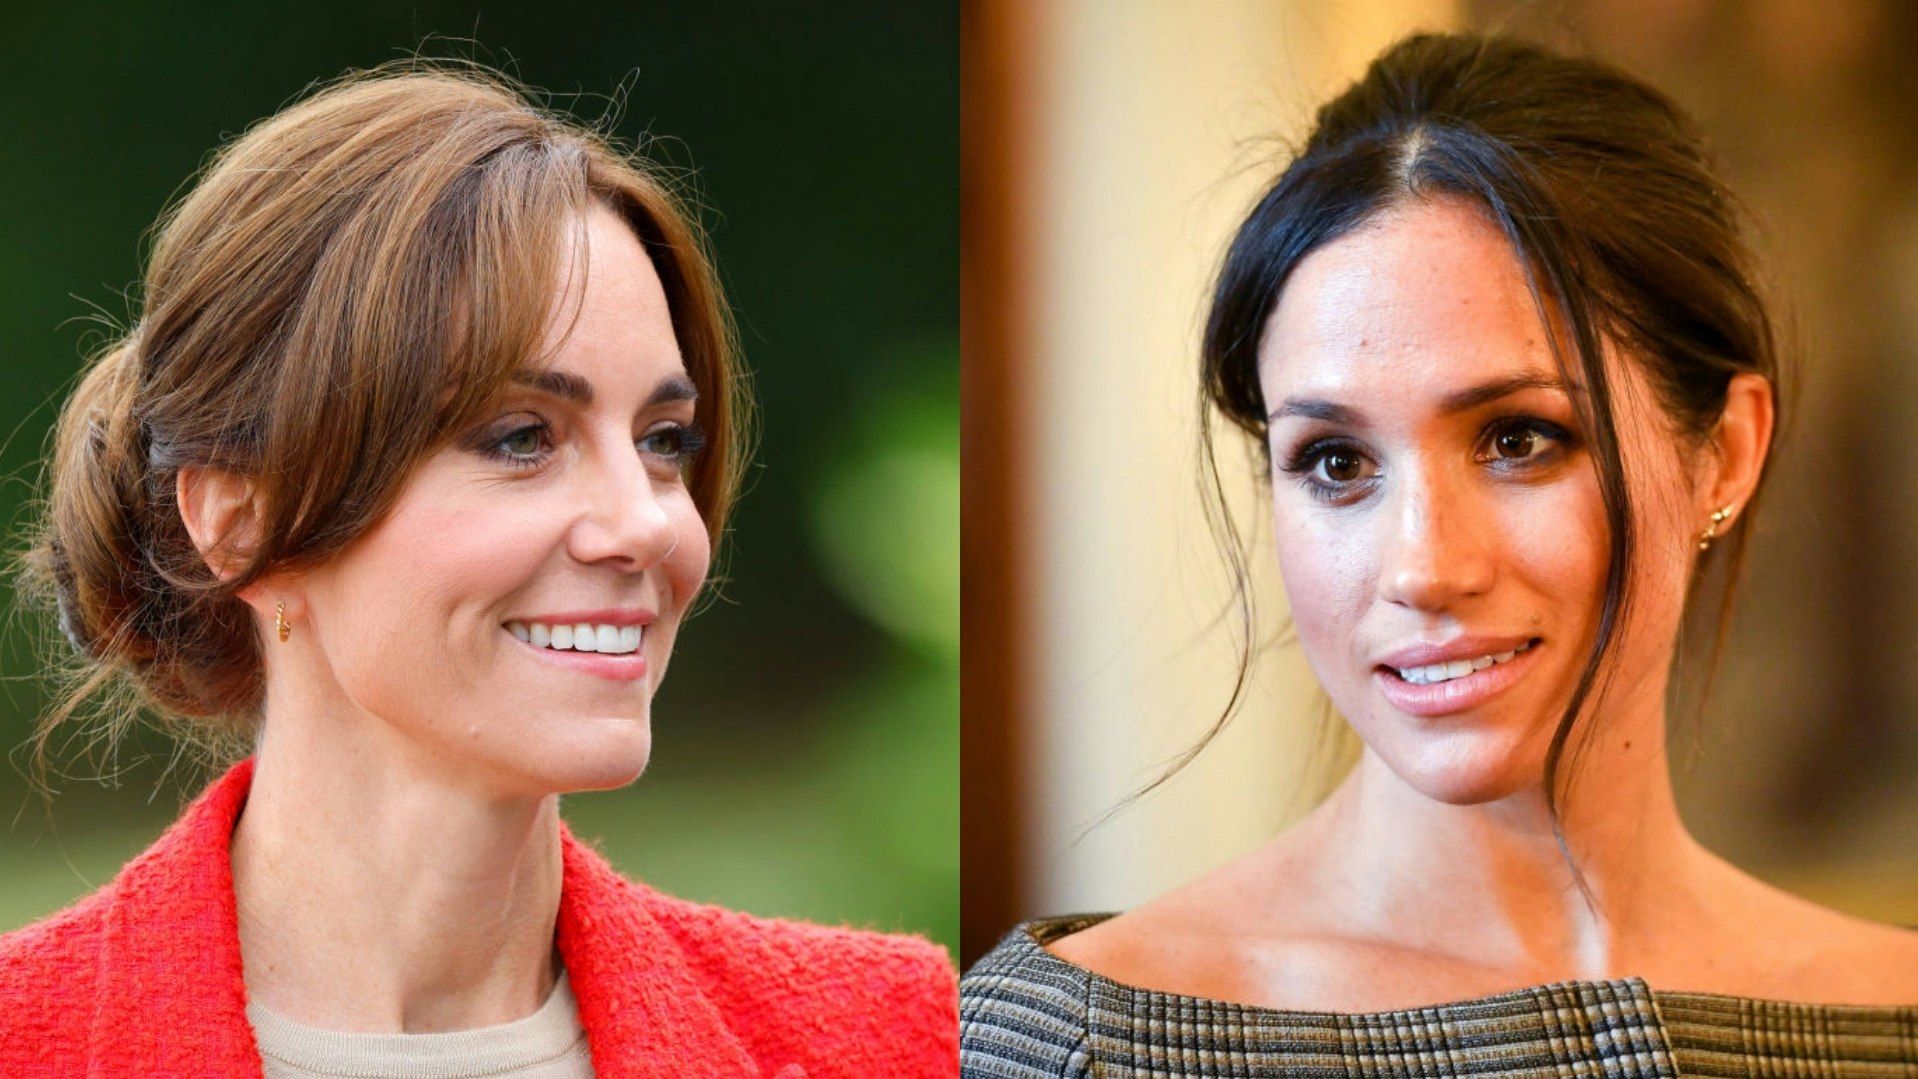 Comparing Headlines About Kate Middleton’s ‘Messy Bun’ To Meghan Markle’s Shows A Glaring Double Standard